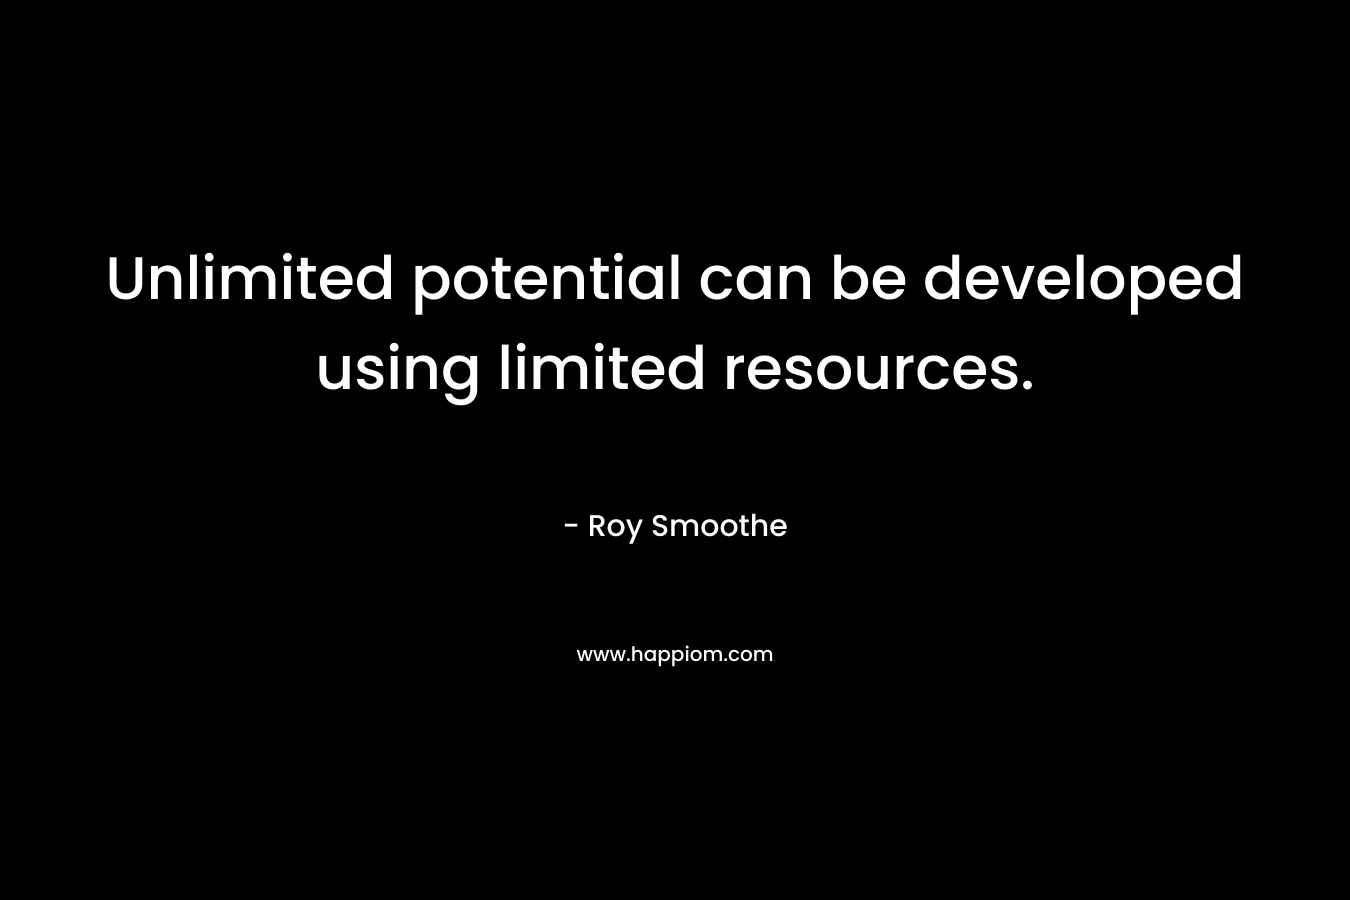 Unlimited potential can be developed using limited resources. – Roy Smoothe